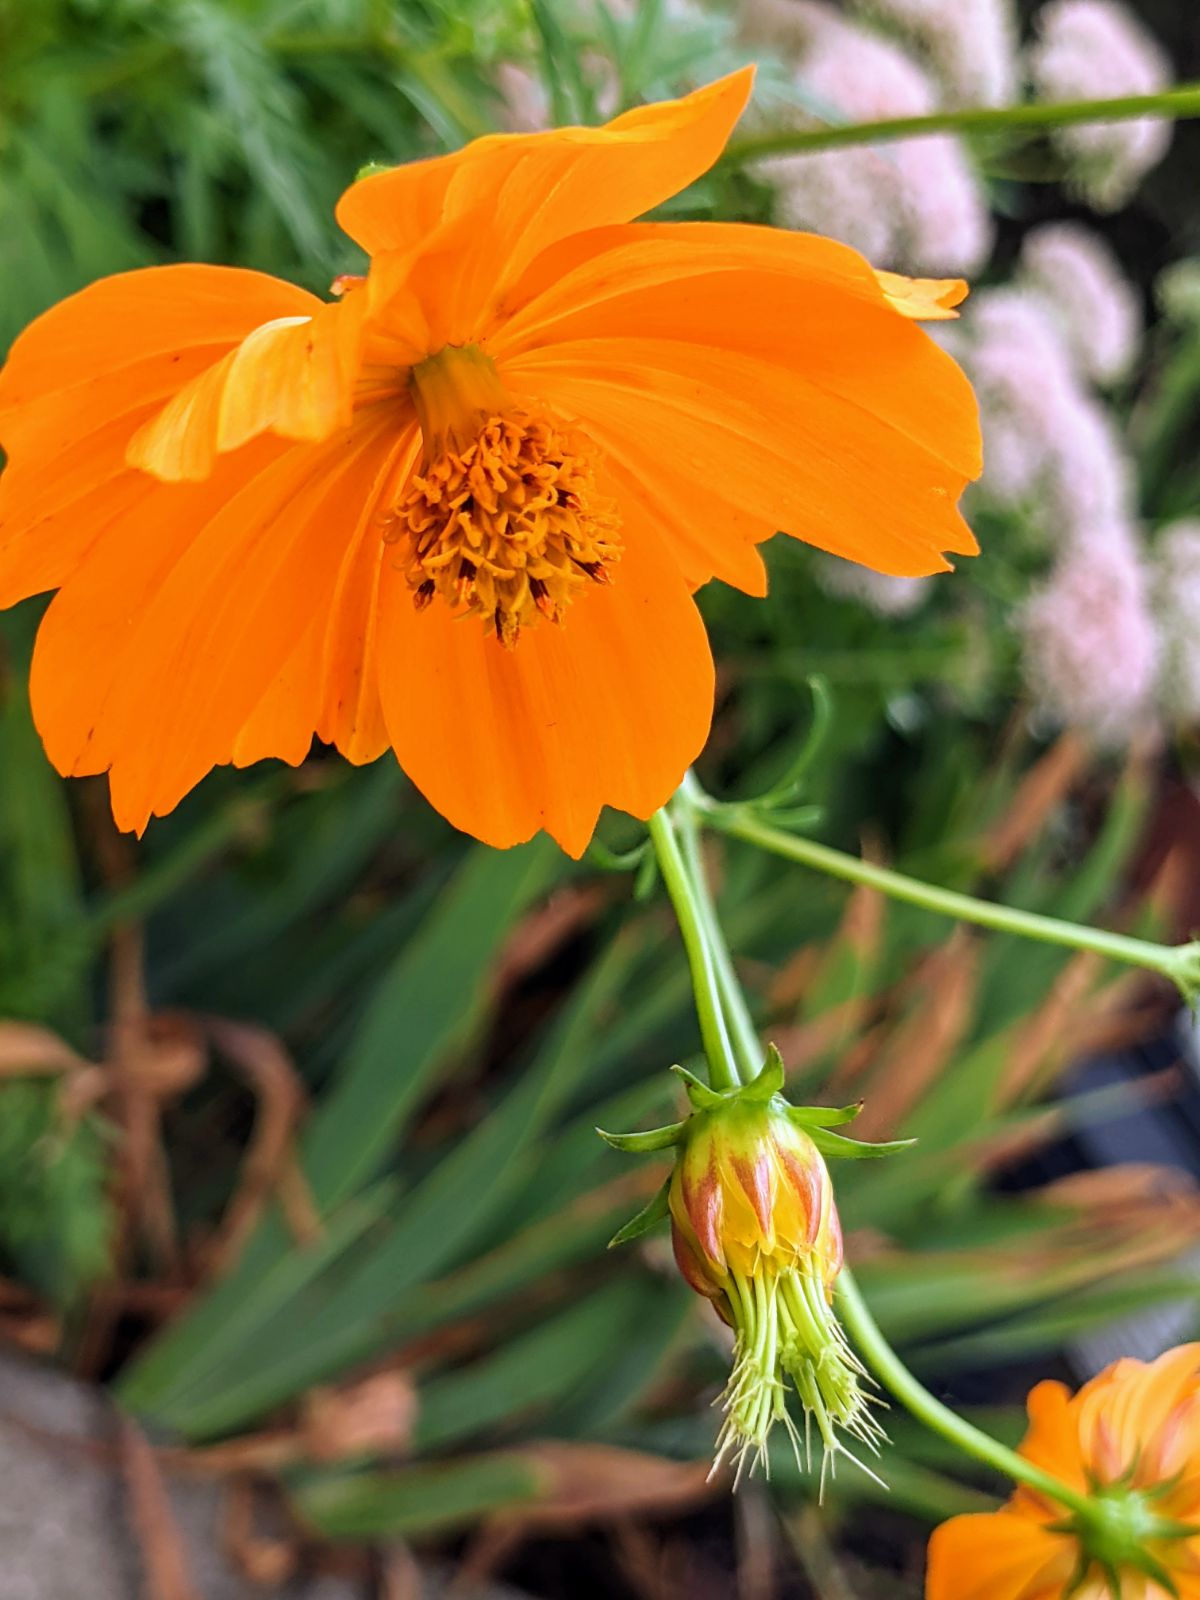 Orange cosmo flower and green seed head that is working on ripening the seeds. Wait a bit longer to harvest this one!